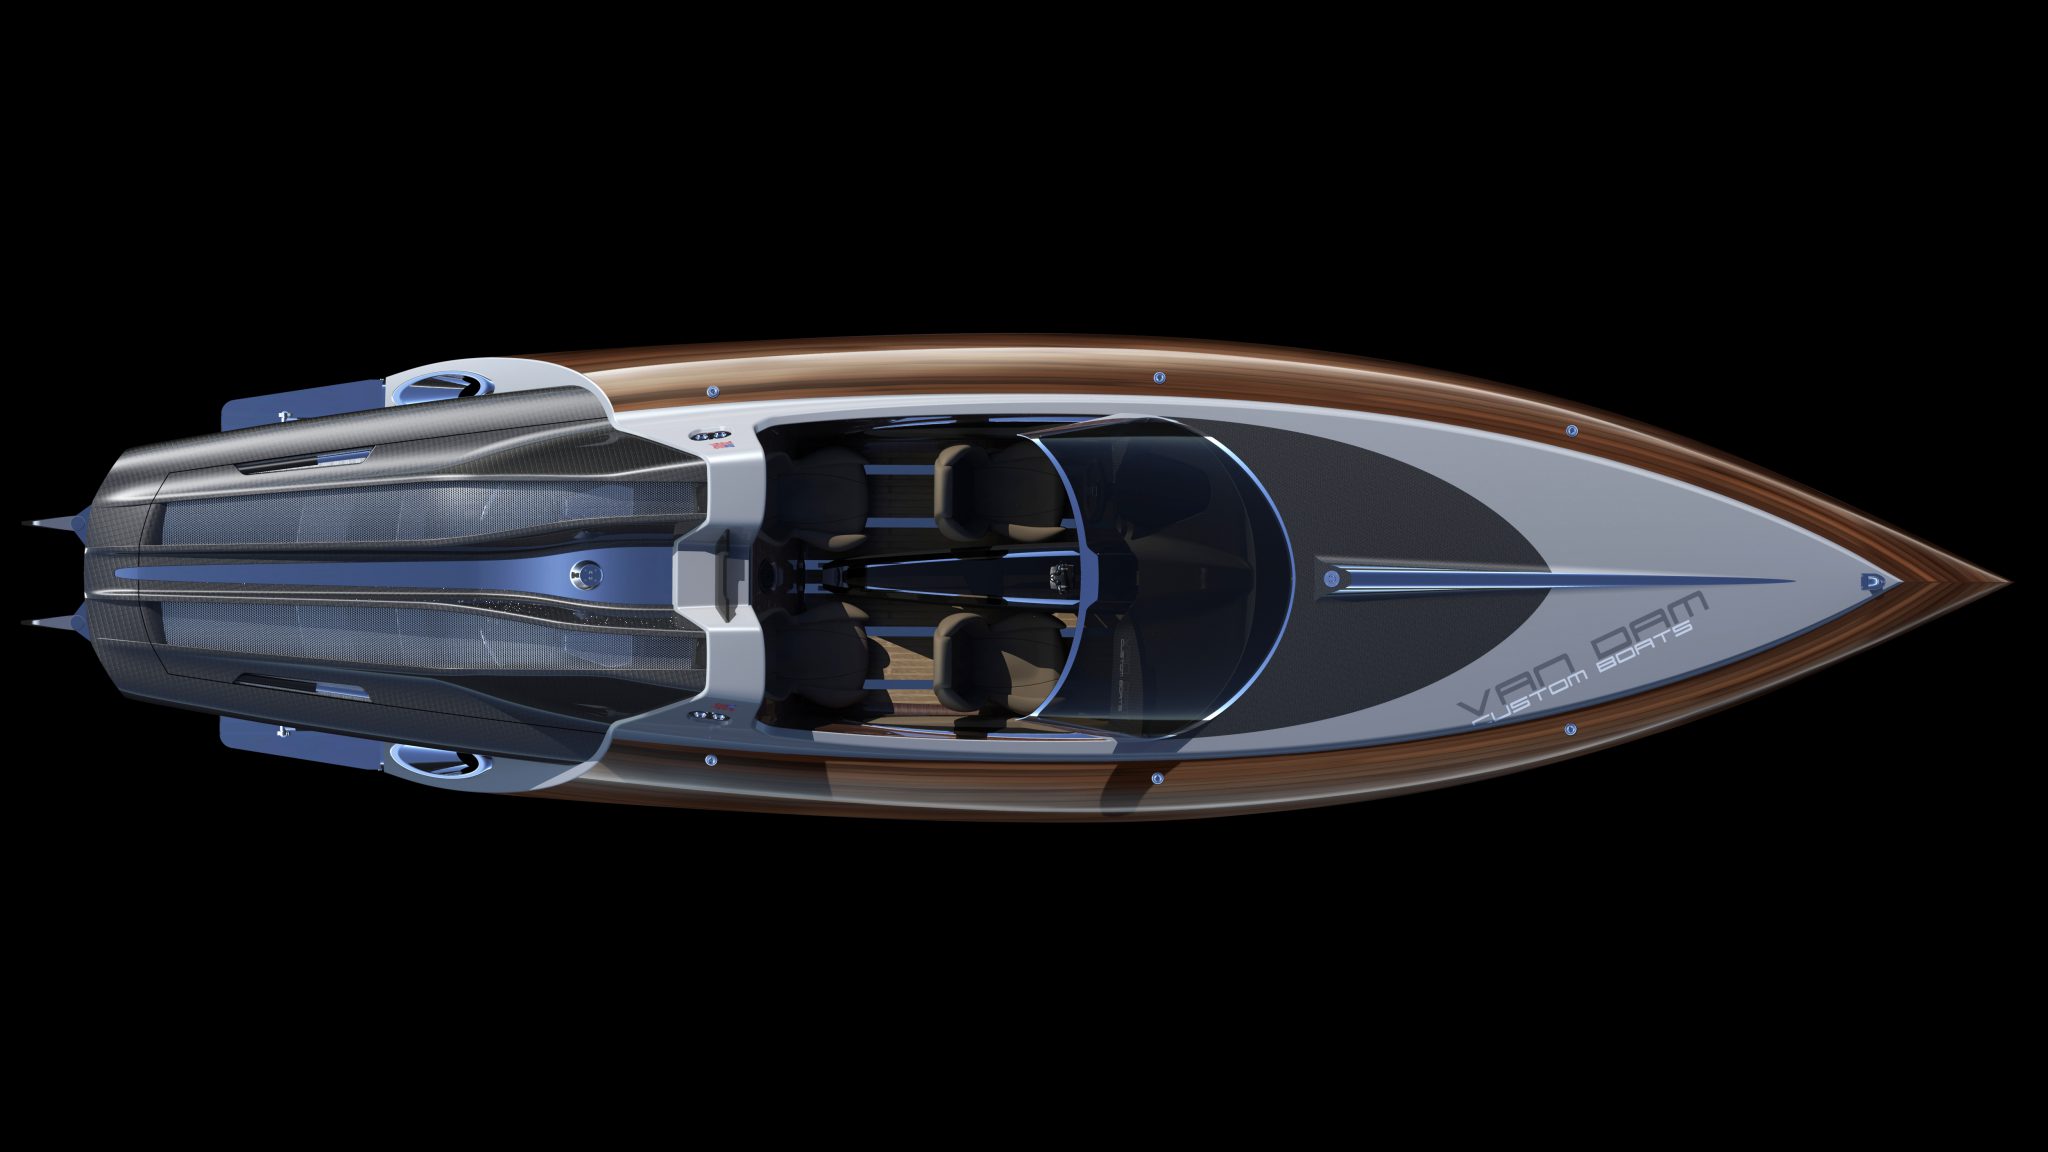 Over view of concept boat